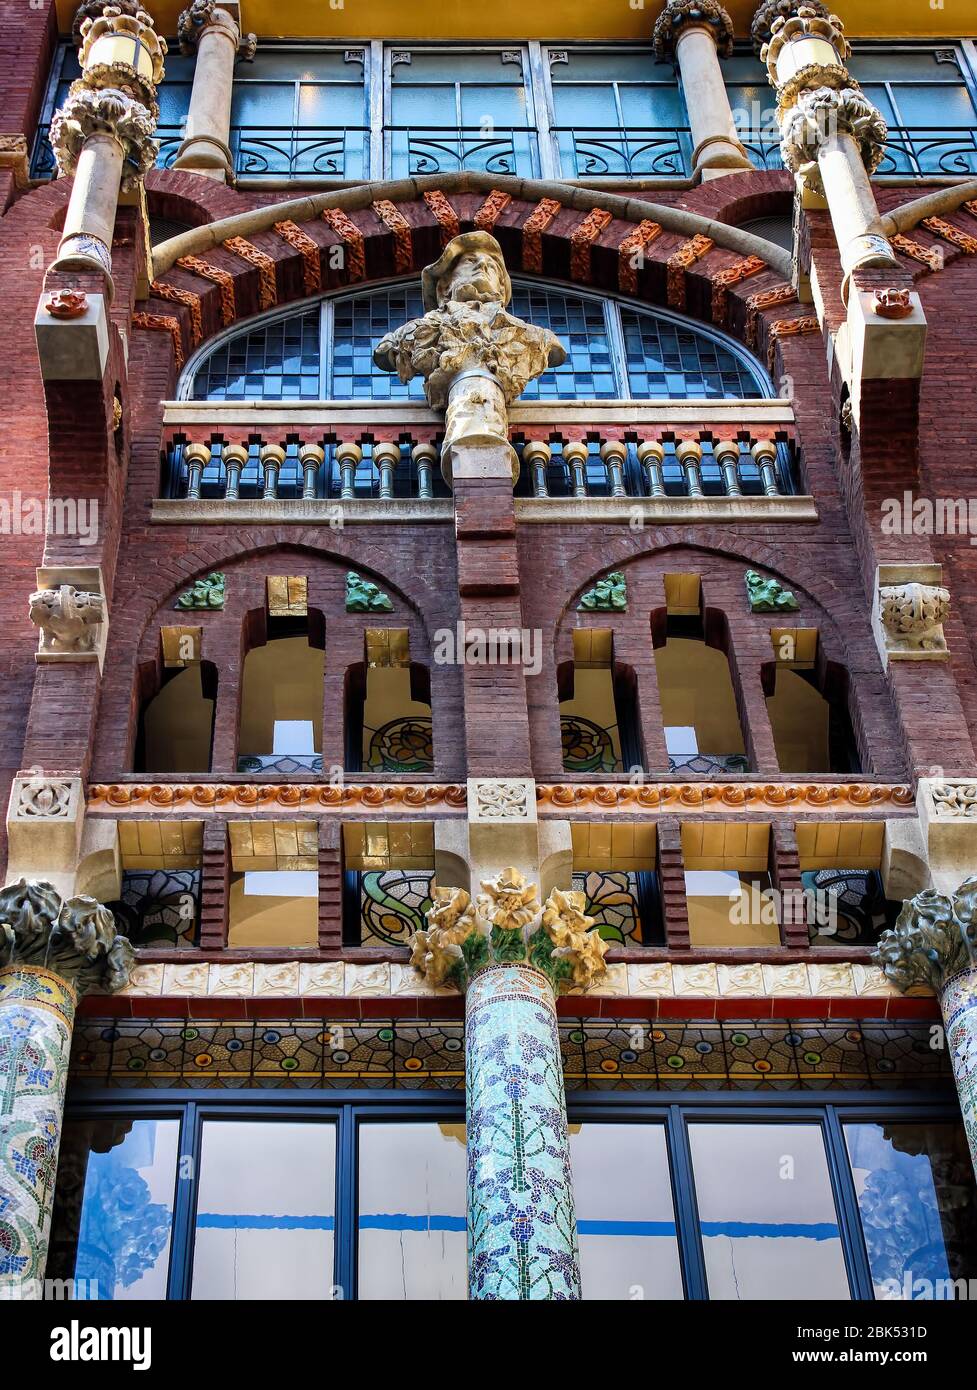 Detailed view of The Palau de la Música Catalana (Palace of Catalan Music), by the architect Lluís Domènech i Montaner. Barcelona, Catalonia, Spain. Stock Photo